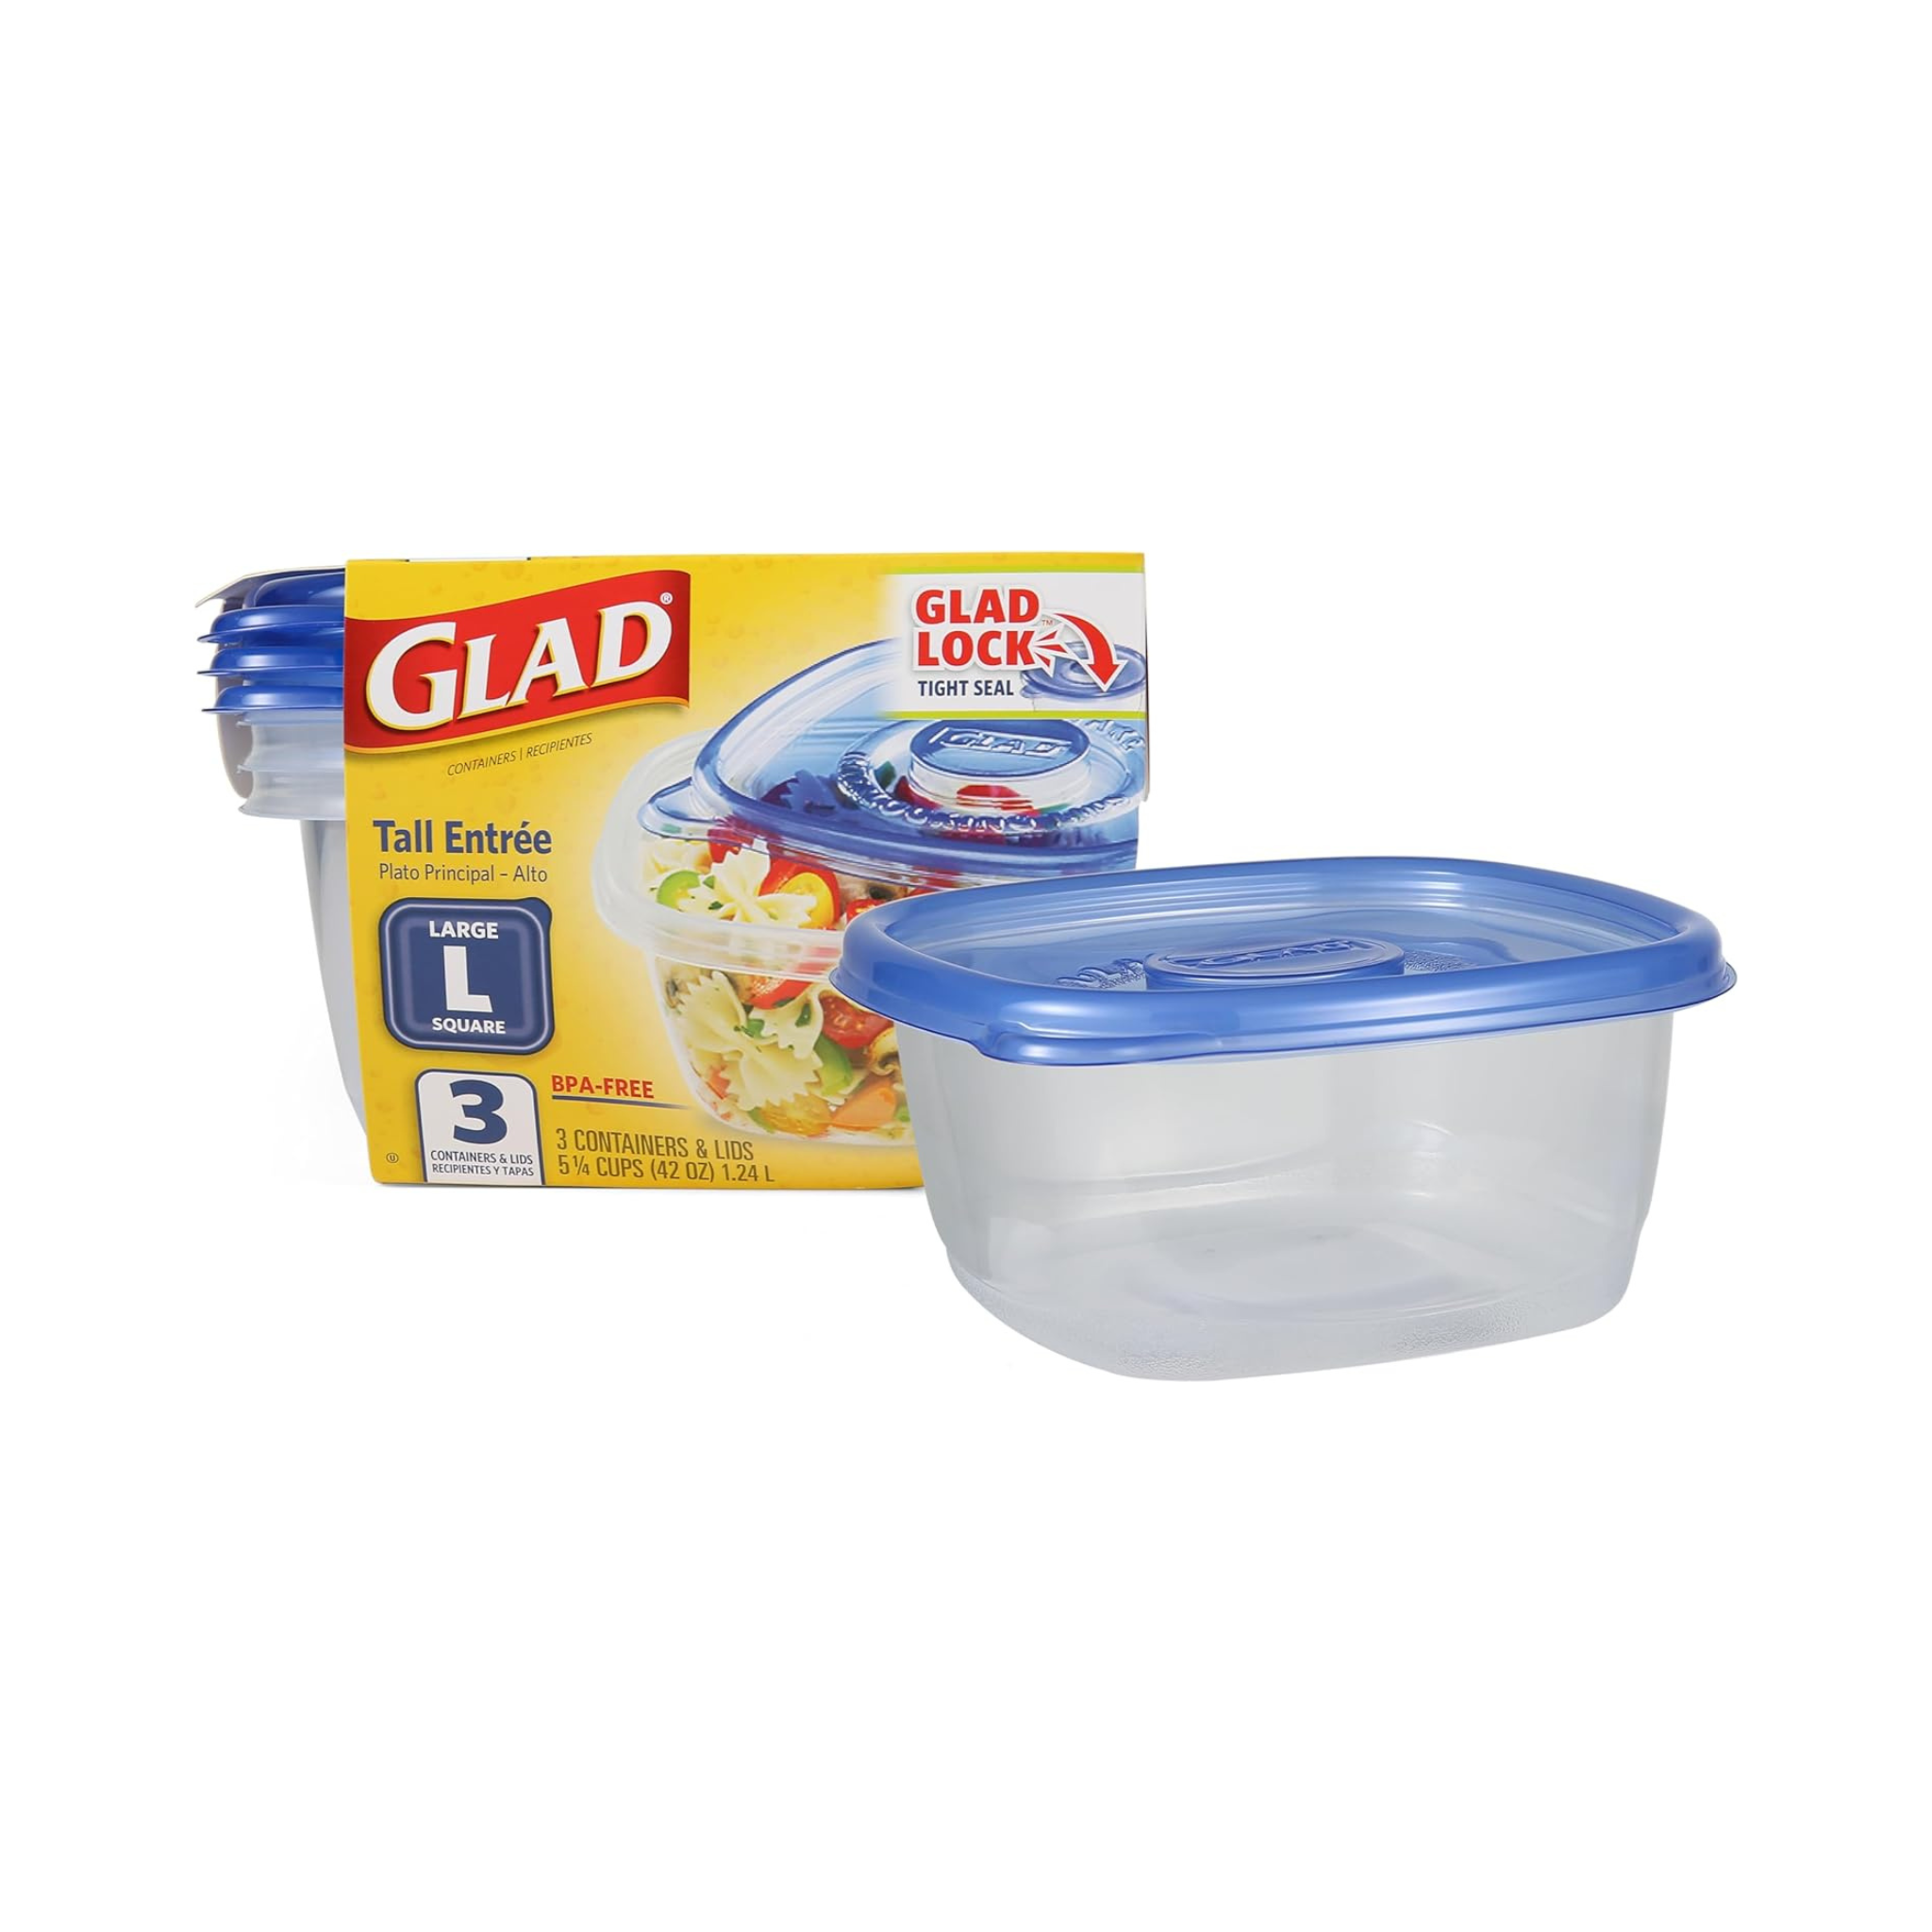 Glad GladWare Tall Entrée Food Storage Containers, Large Square Containers, 3 Count